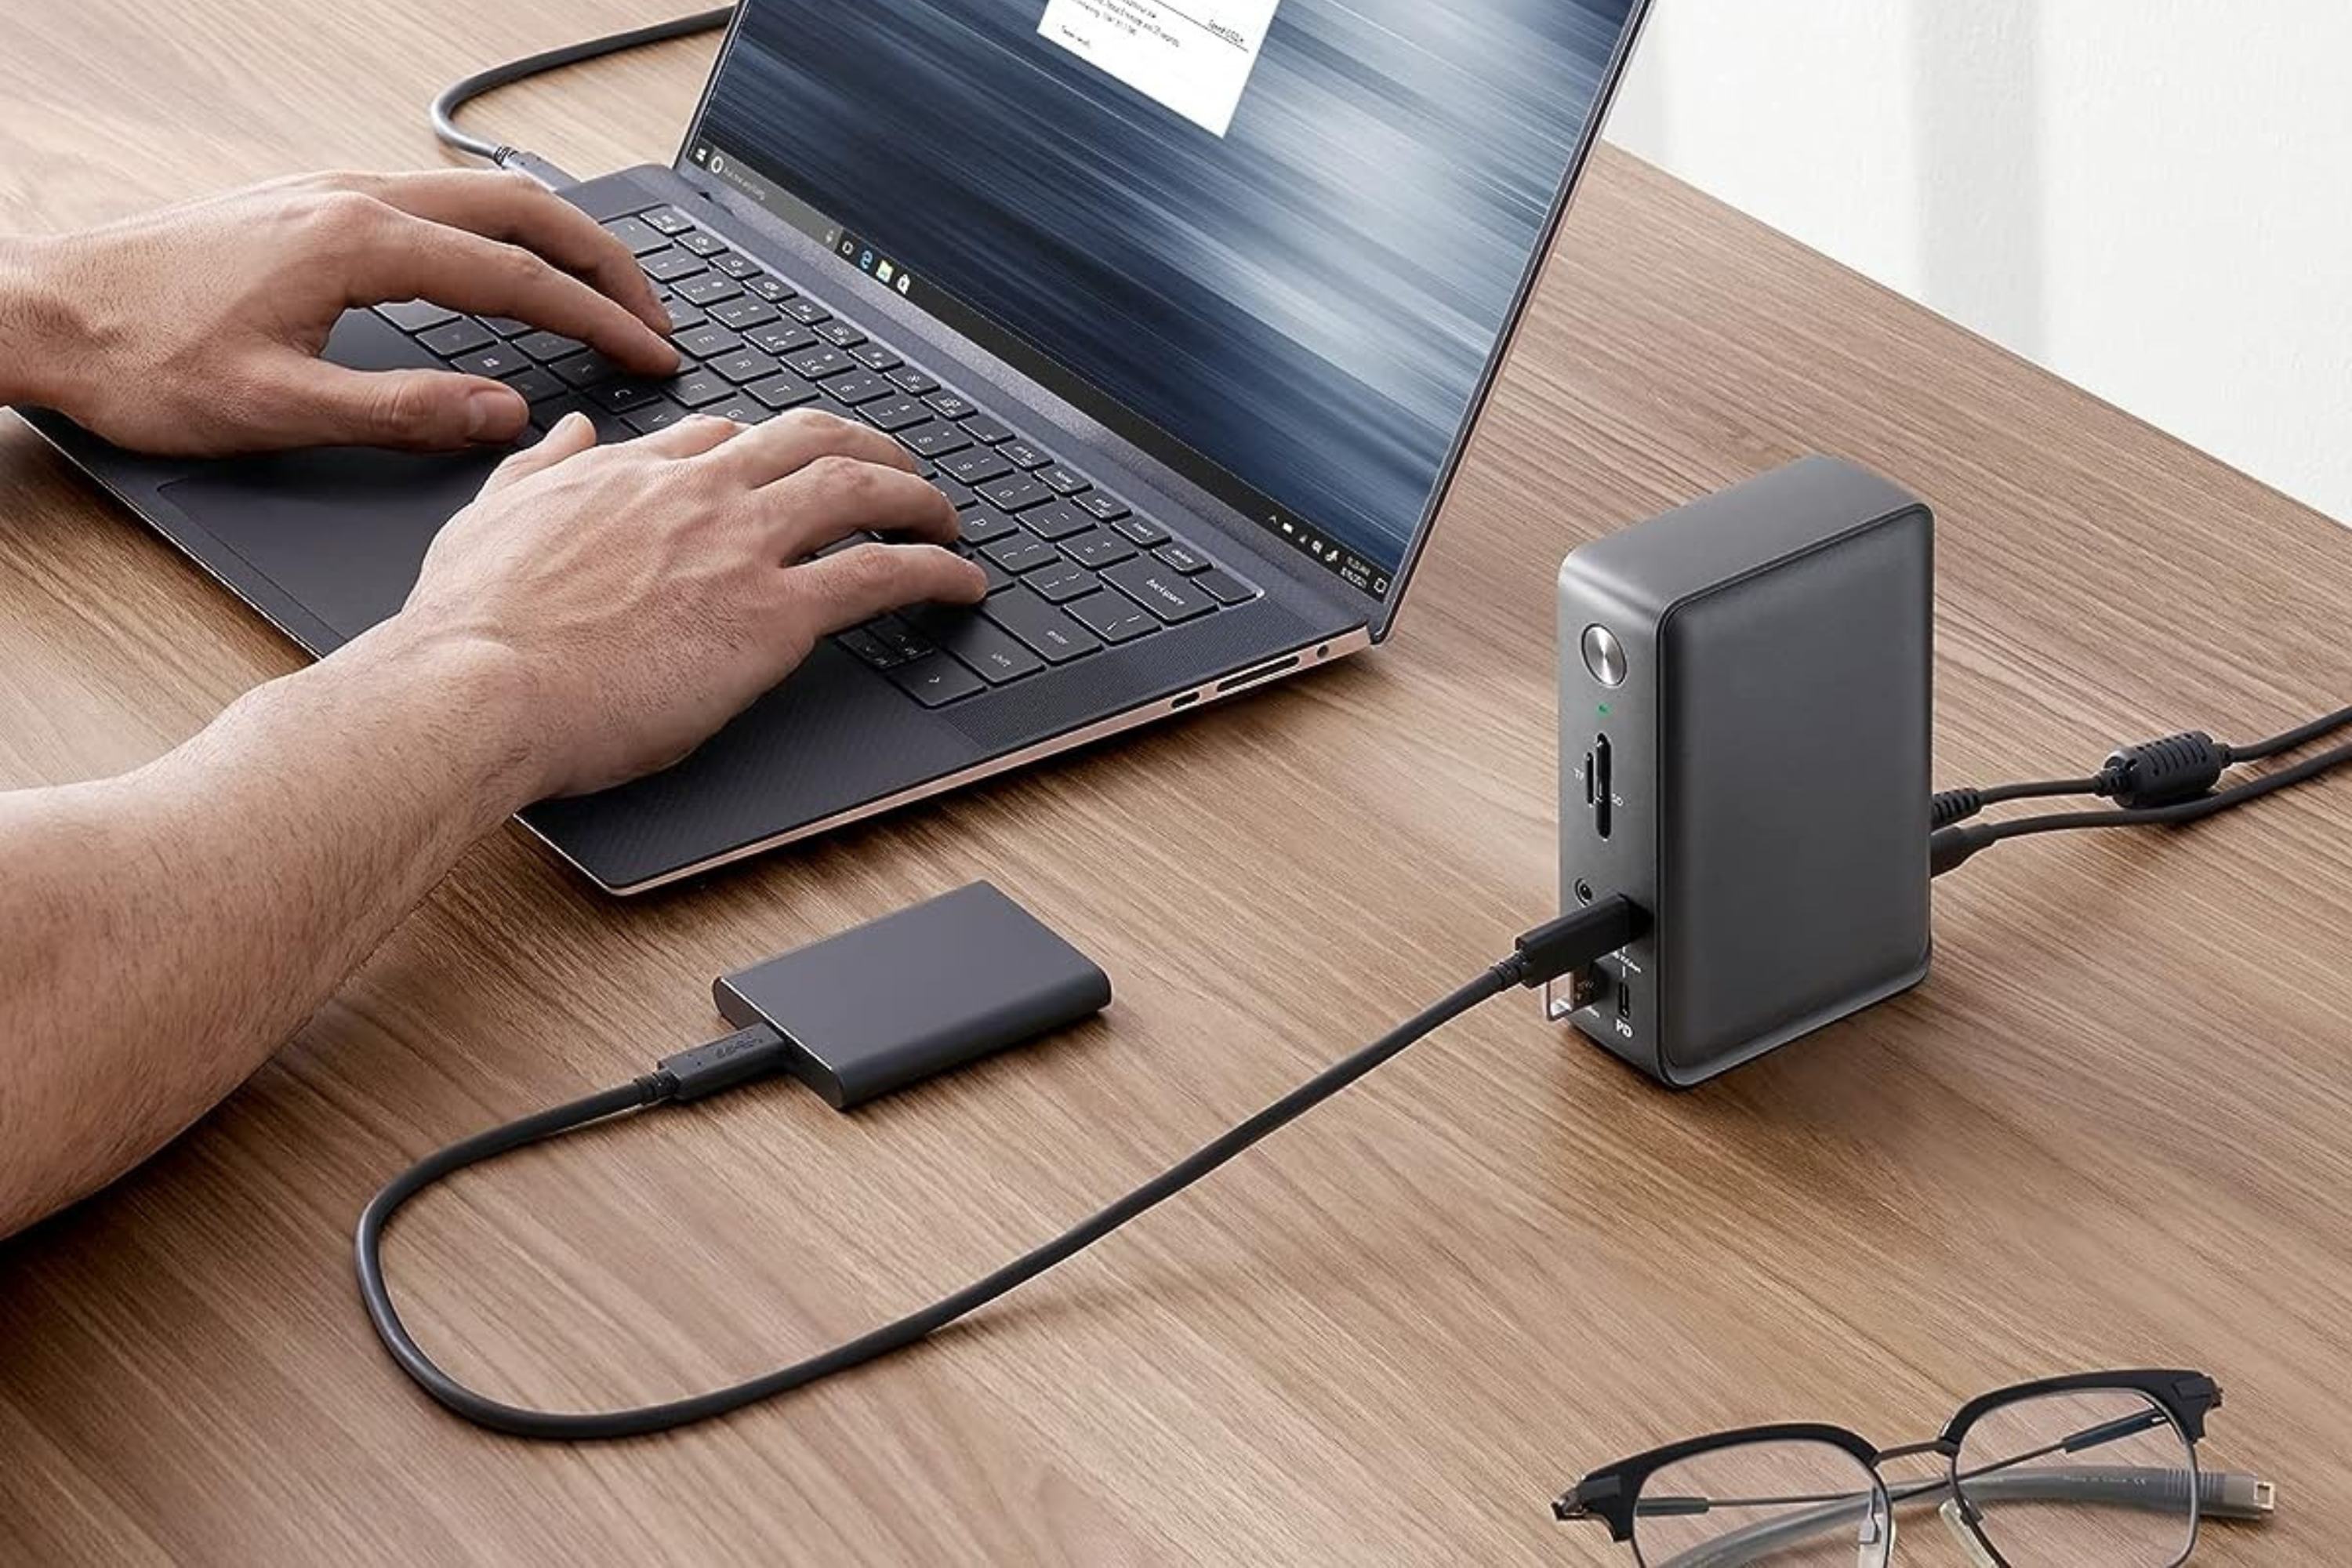 Anker 575 docking station on table plugged into portable SSD